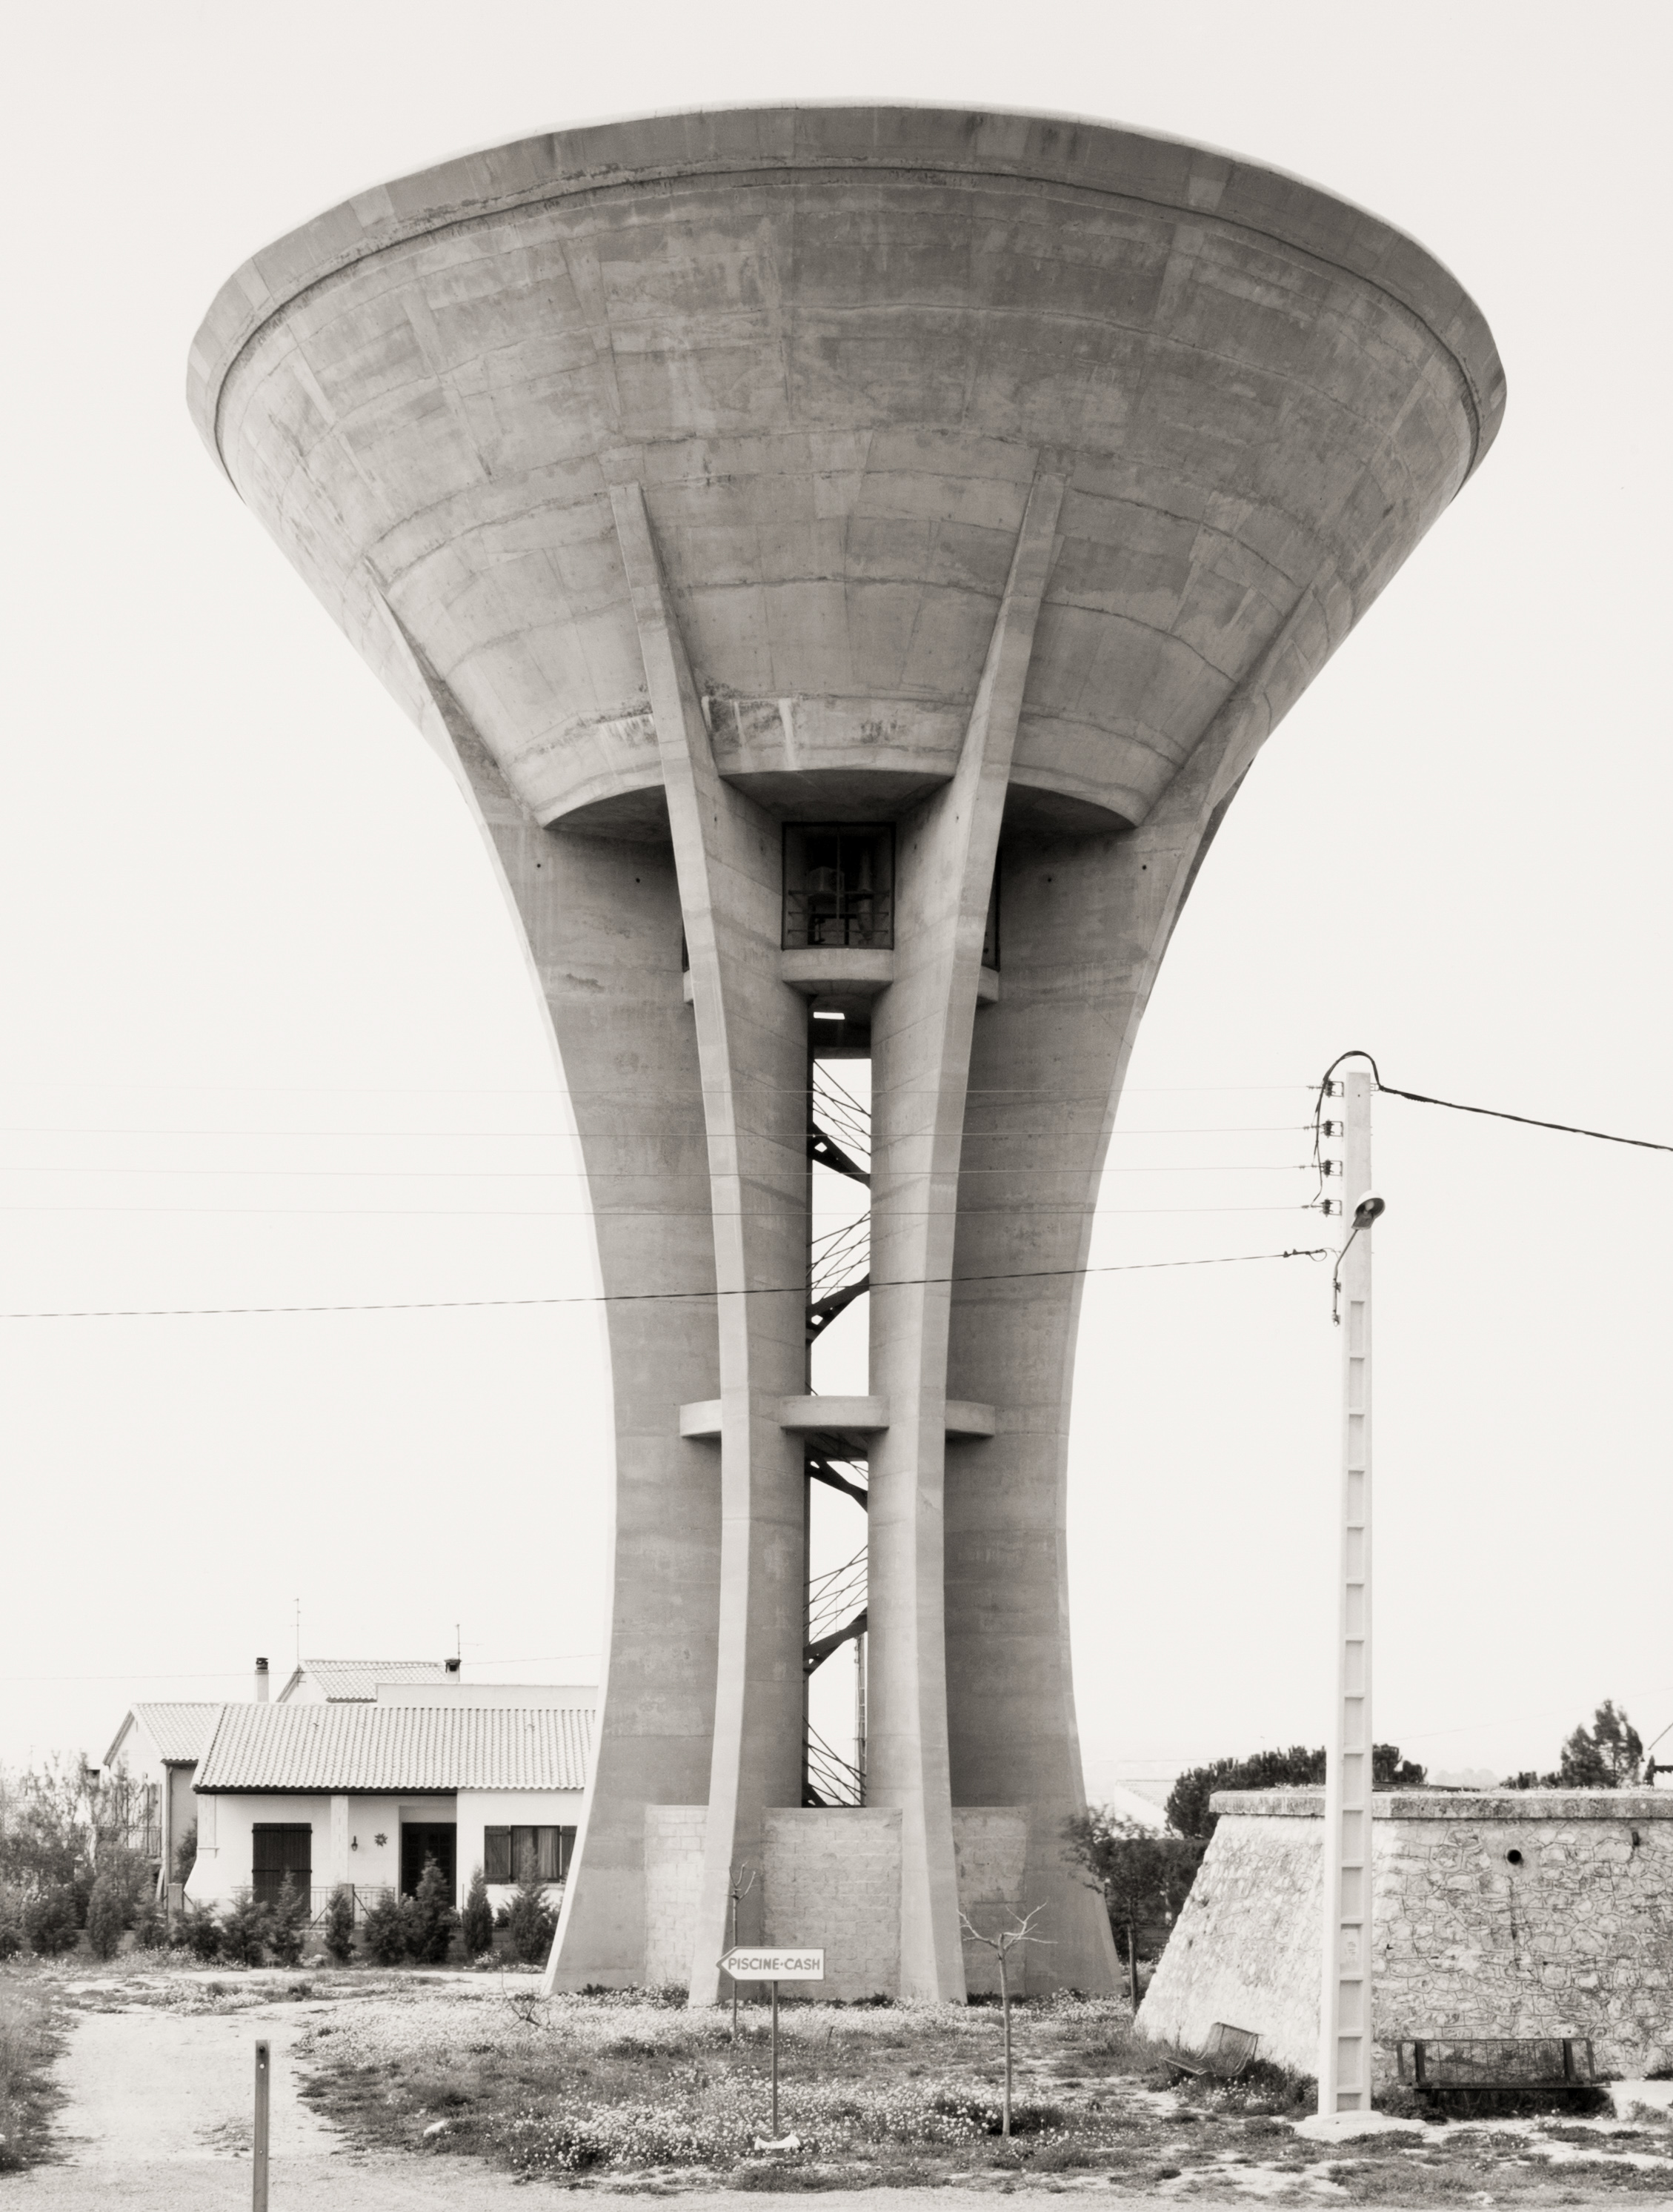 Black and white photograph of a water tower near electrical power lines